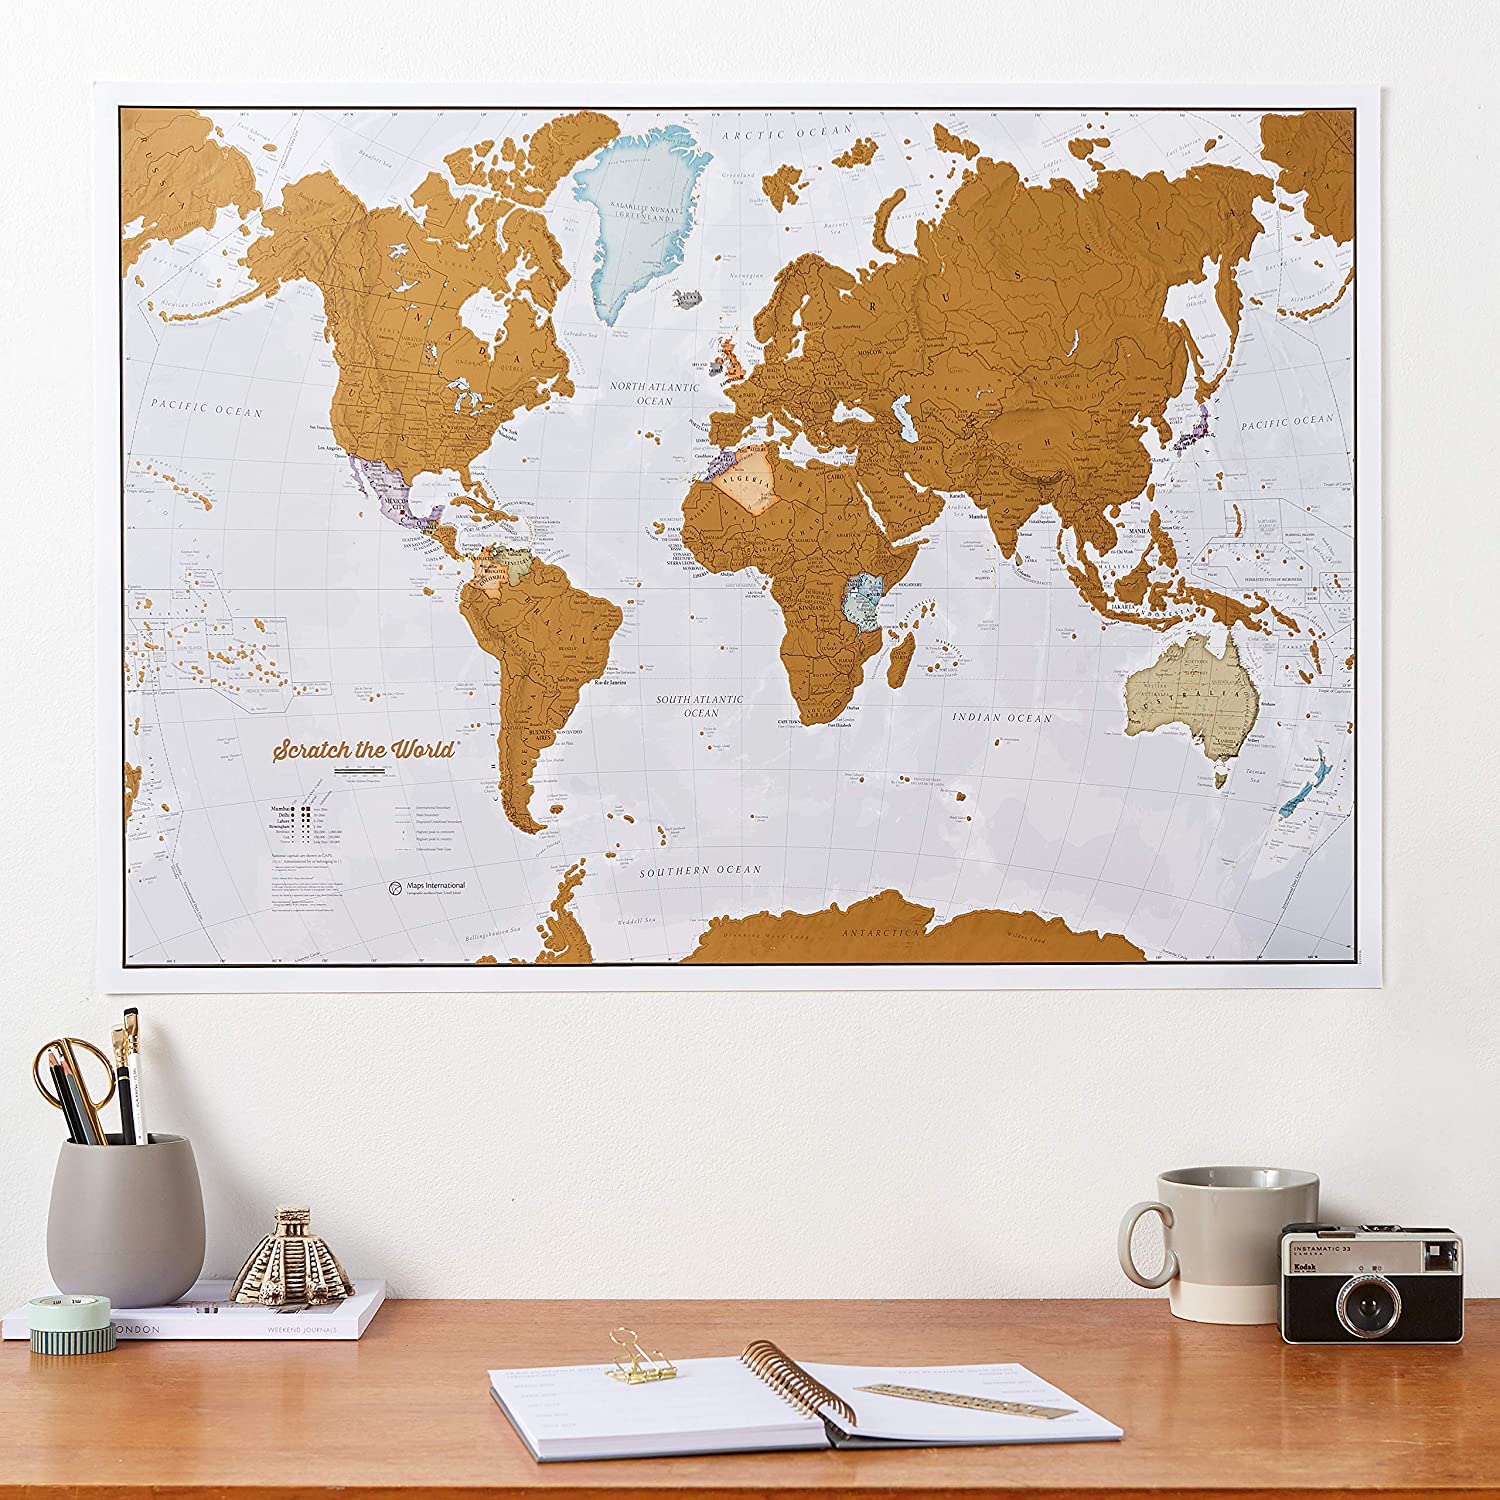 scratch off world map, one of the best valentine's day gifts for couples